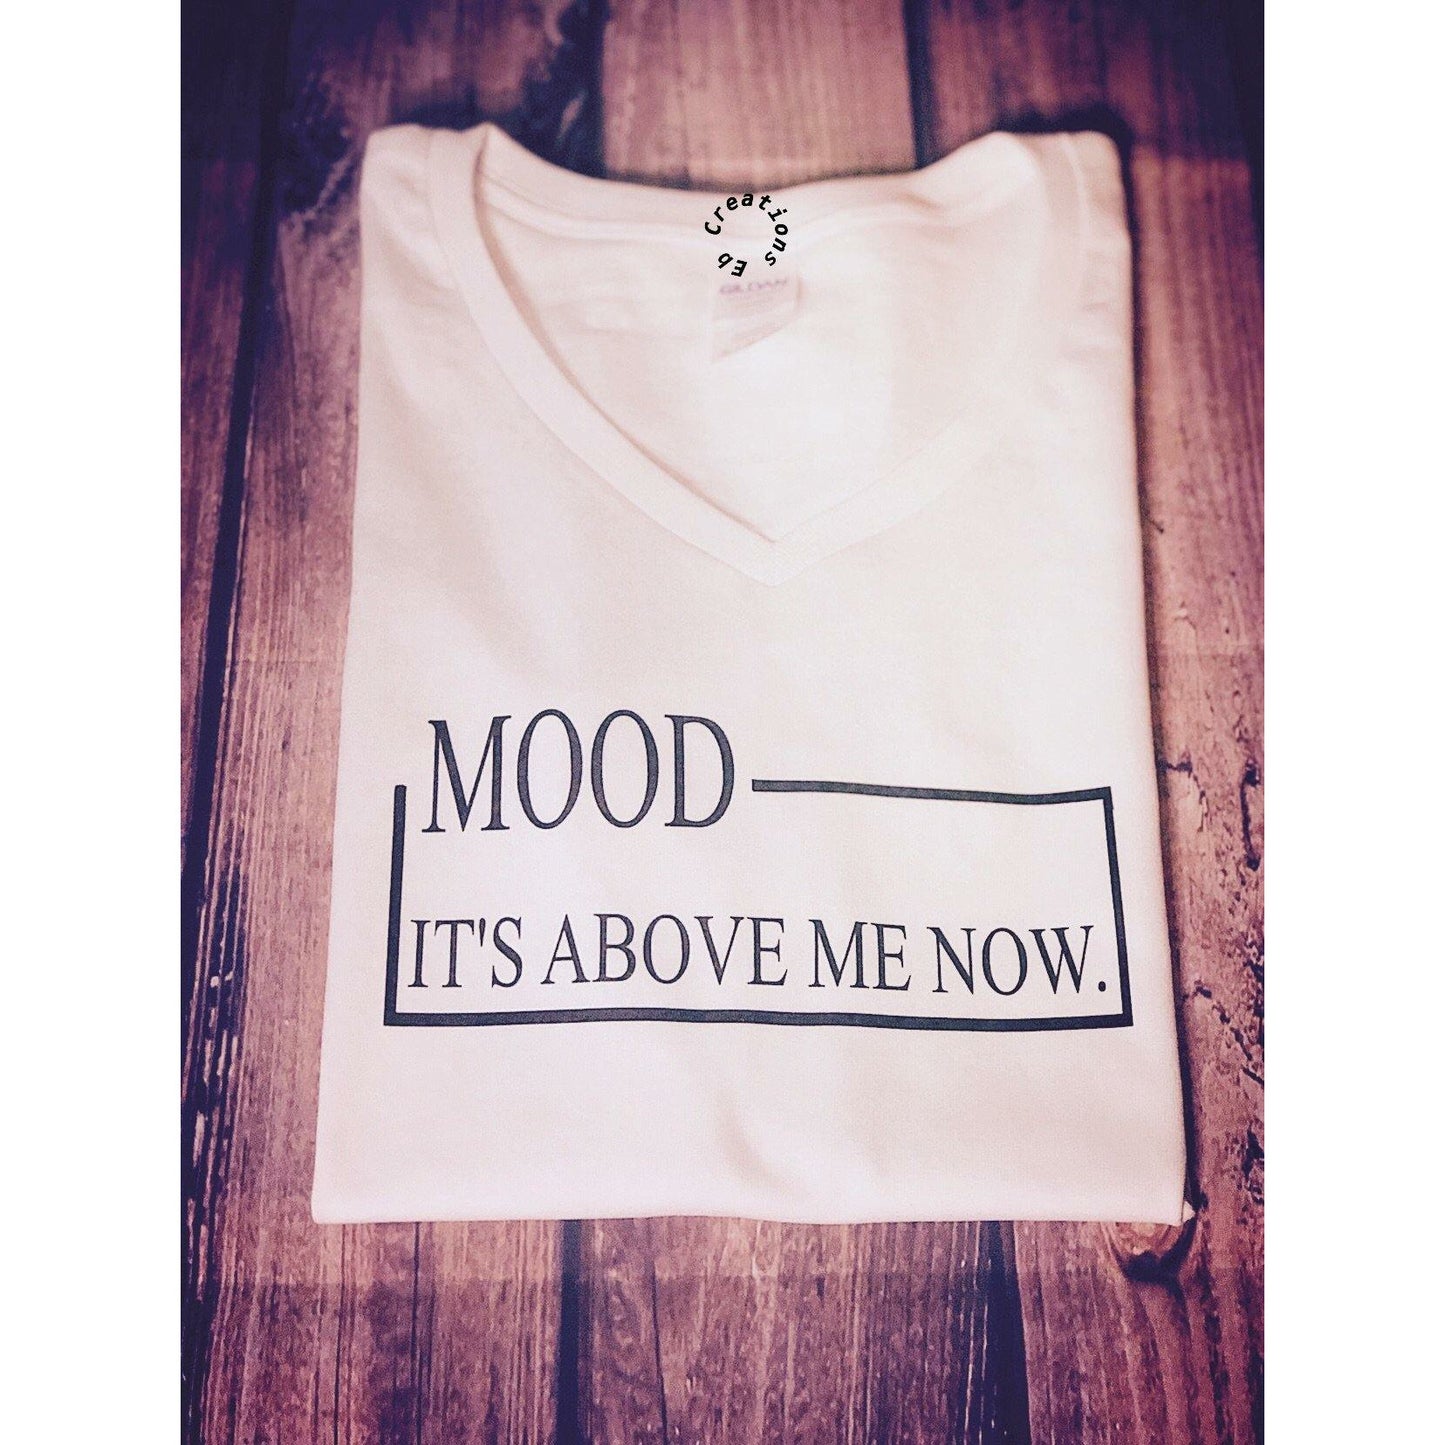 Mood: It’s above me now - Eb Creations Tee Mood: It’s above me now